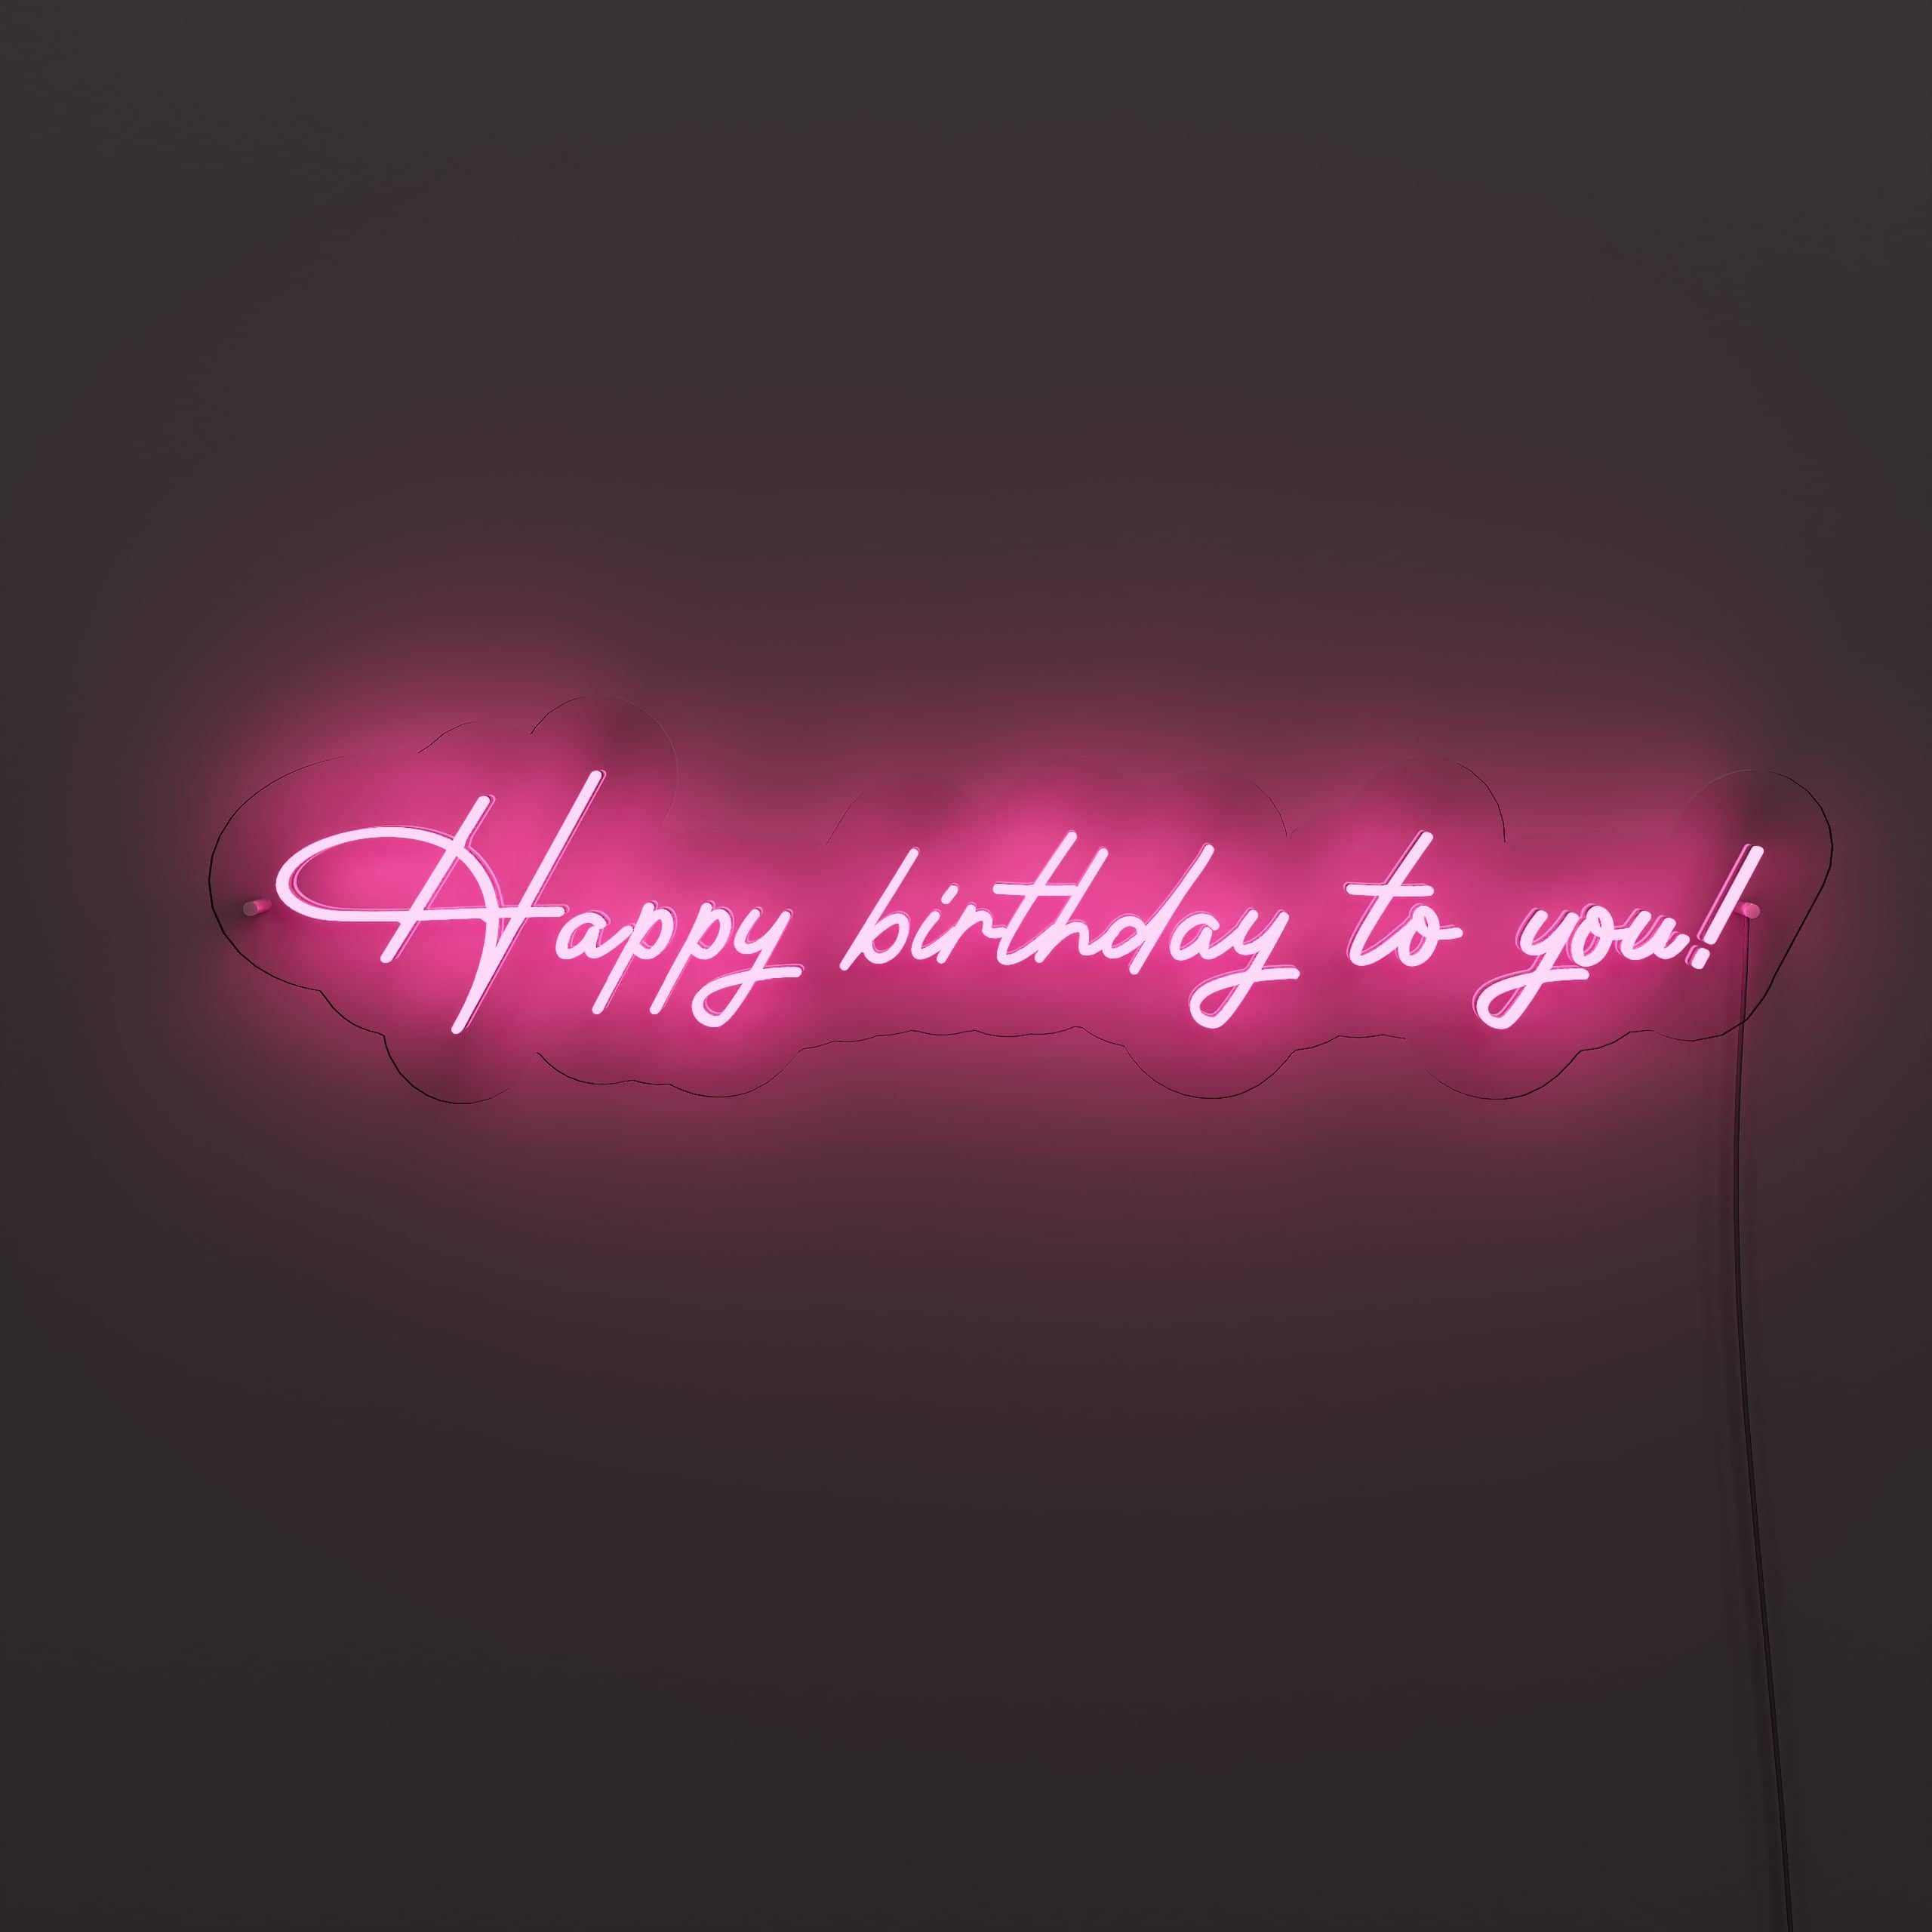 may-your-birthday-be-filled-with-joy-and-laughter!-neon-sign-lite